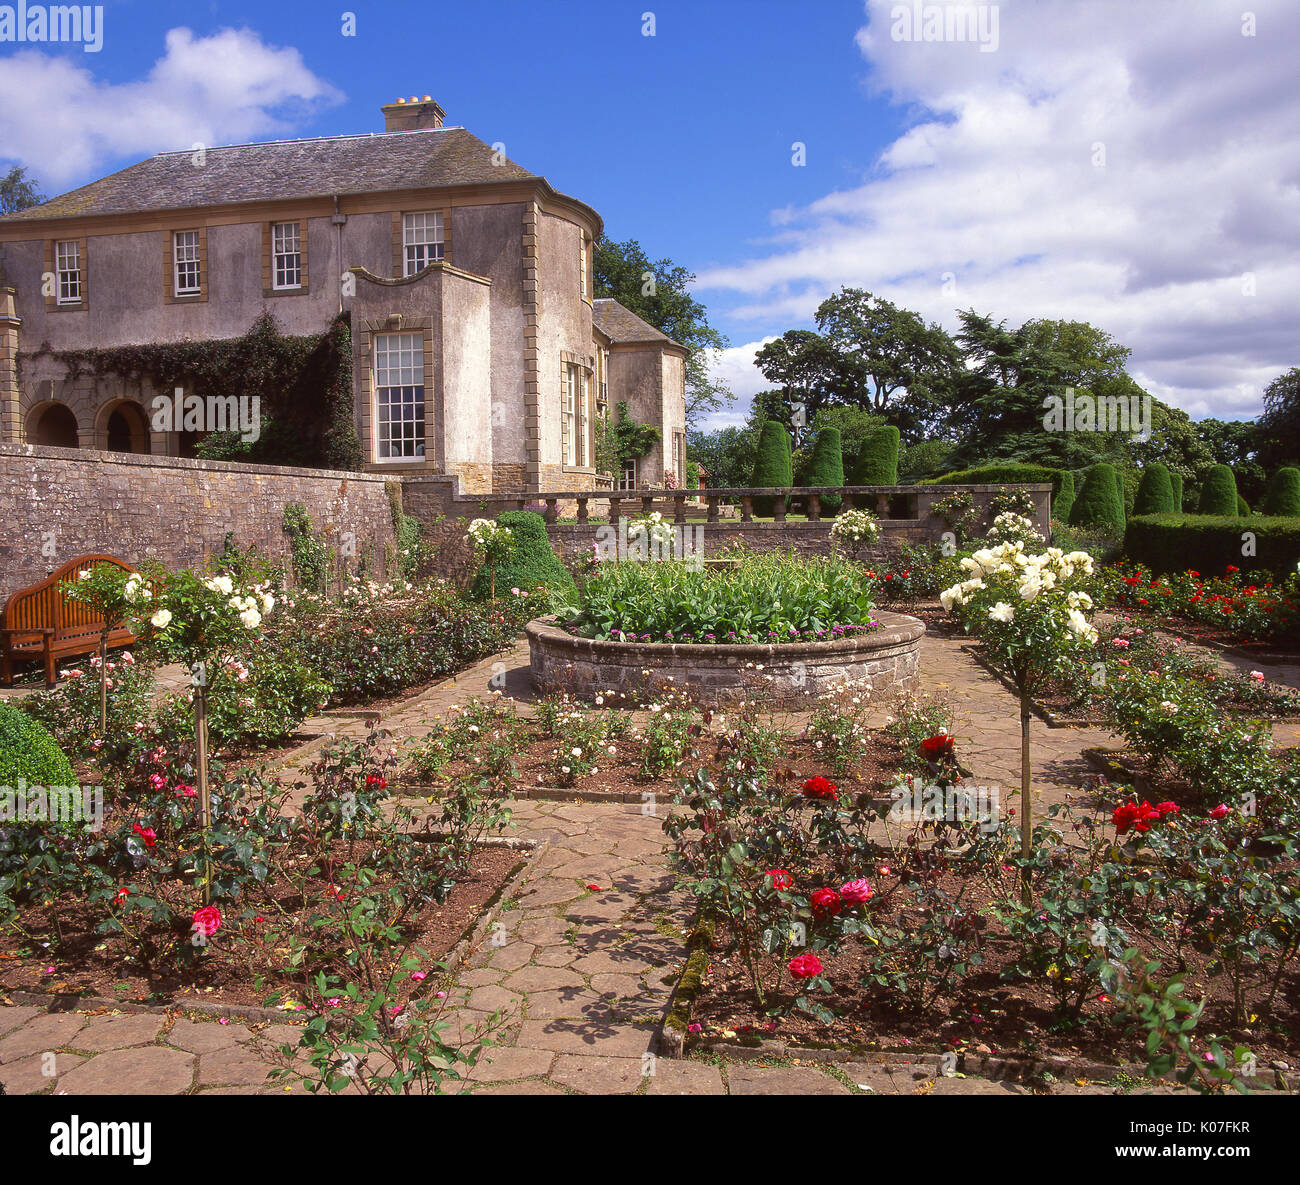 The Hill of Tarvit house and garden, situated near the Fife town of Cupar, Fife, Scotland Stock Photo